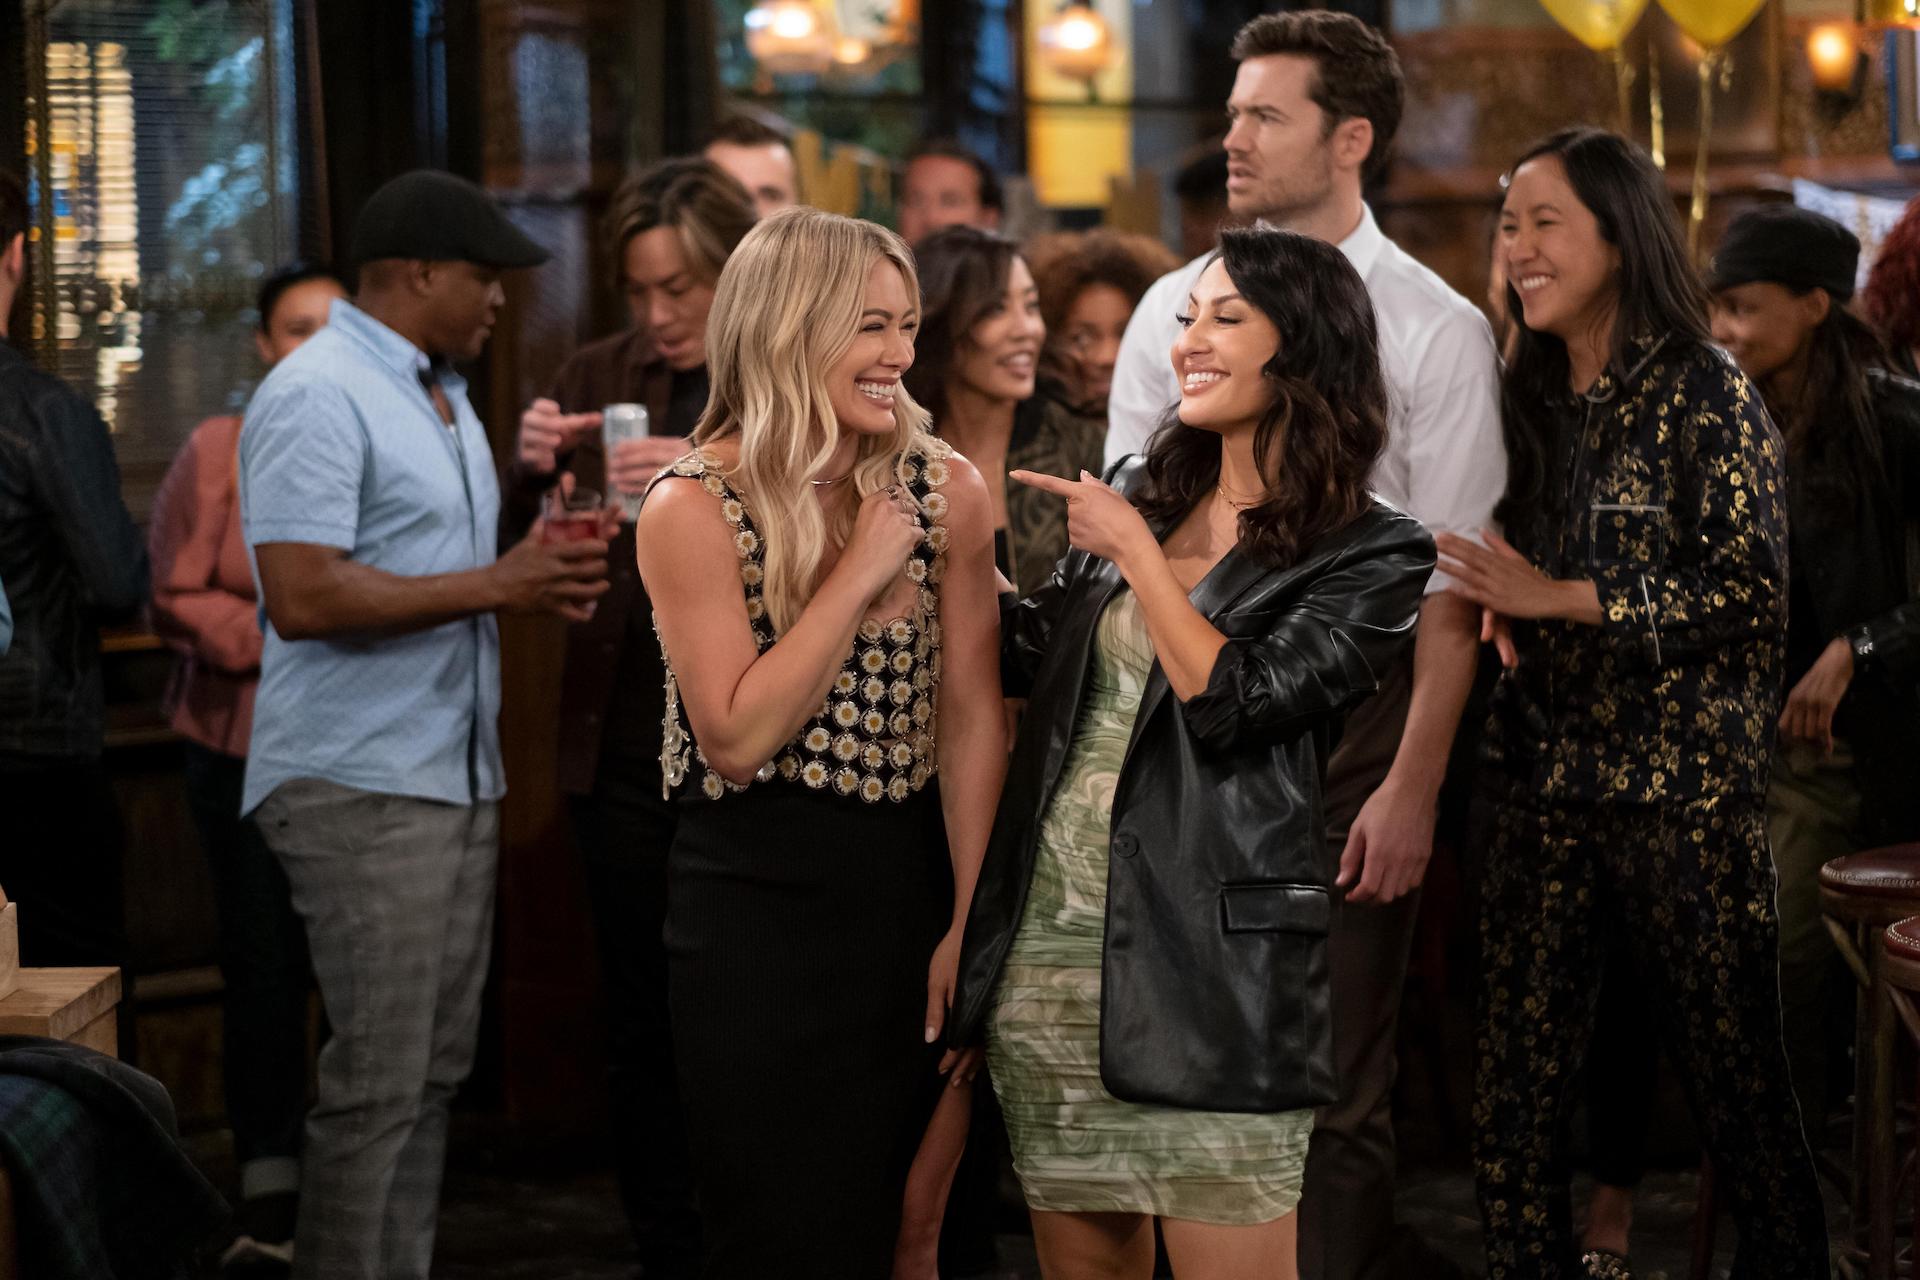 Hulu finally announced the return of How I Met Your Father for a second season. Season two will be released on Hulu on January 24 and will consist of 20 brand-new episodes.